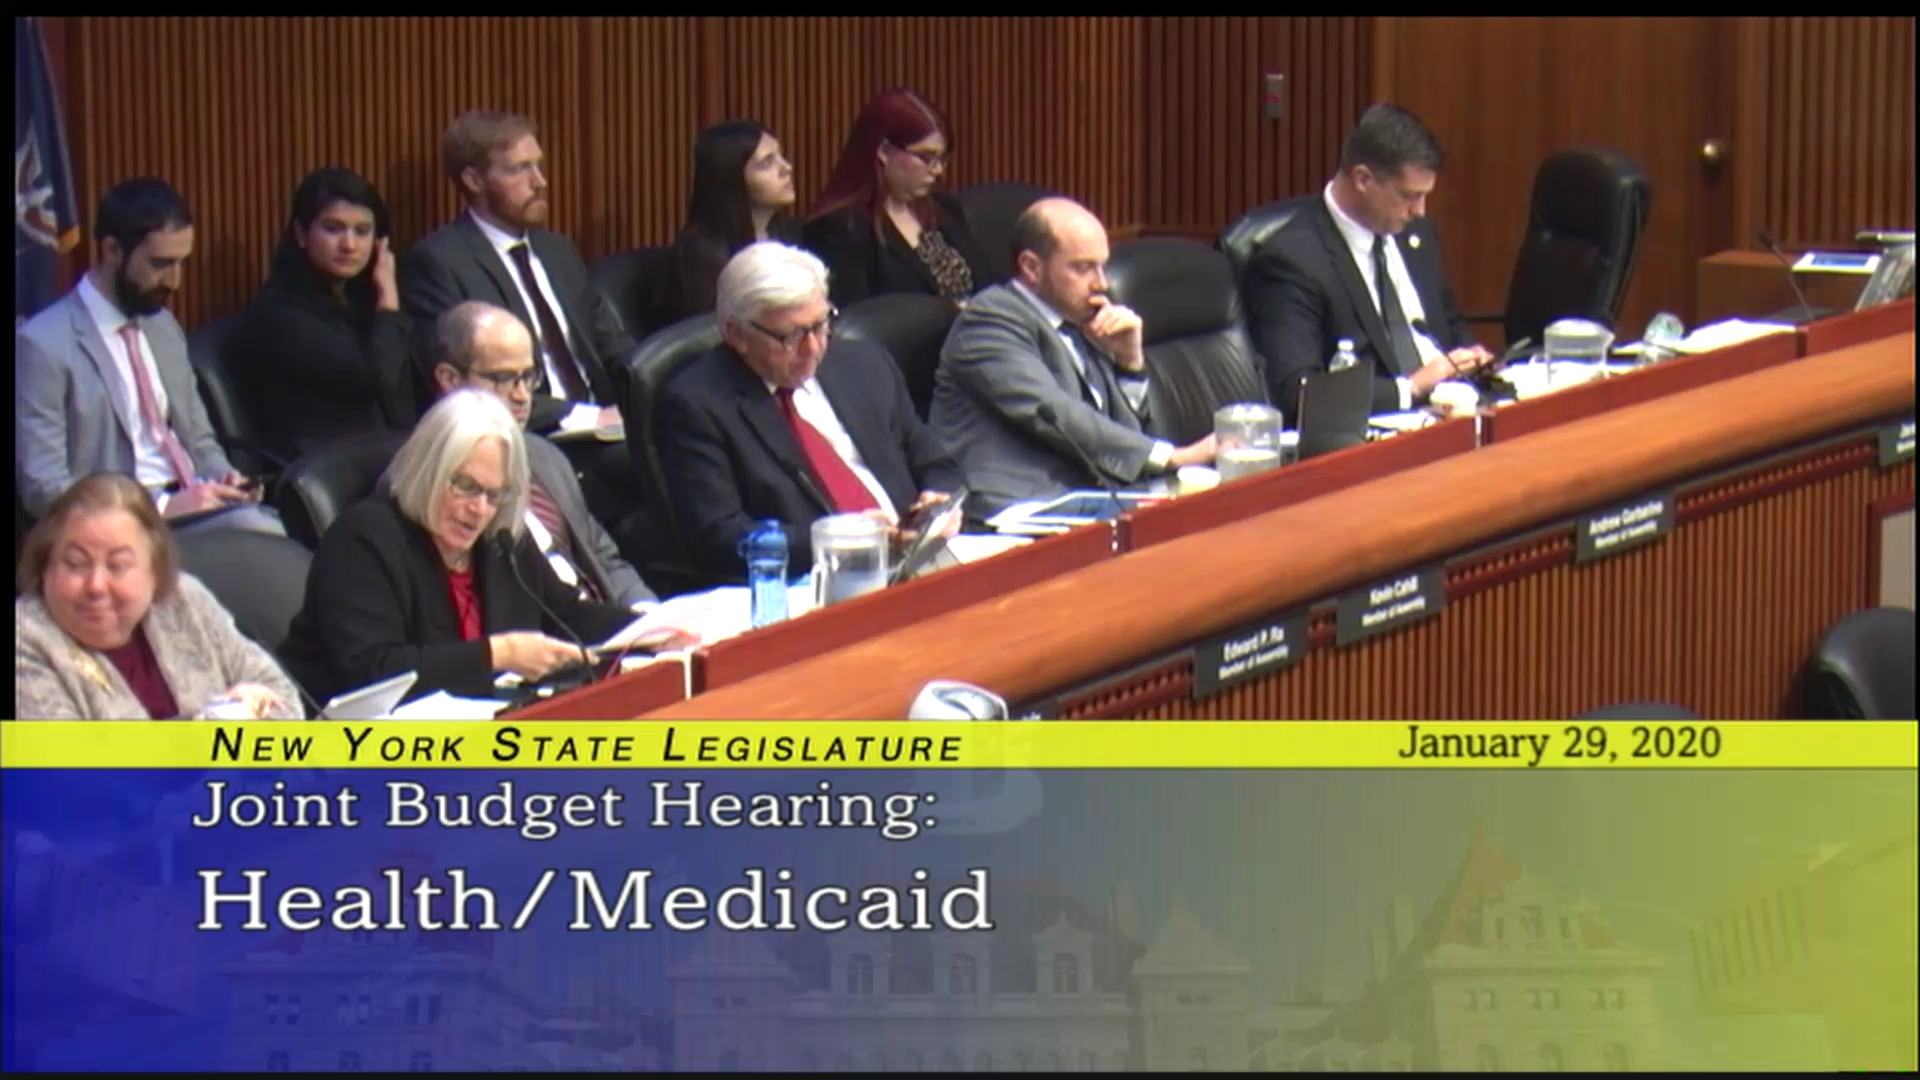 2020 Joint Budget Hearing on Health